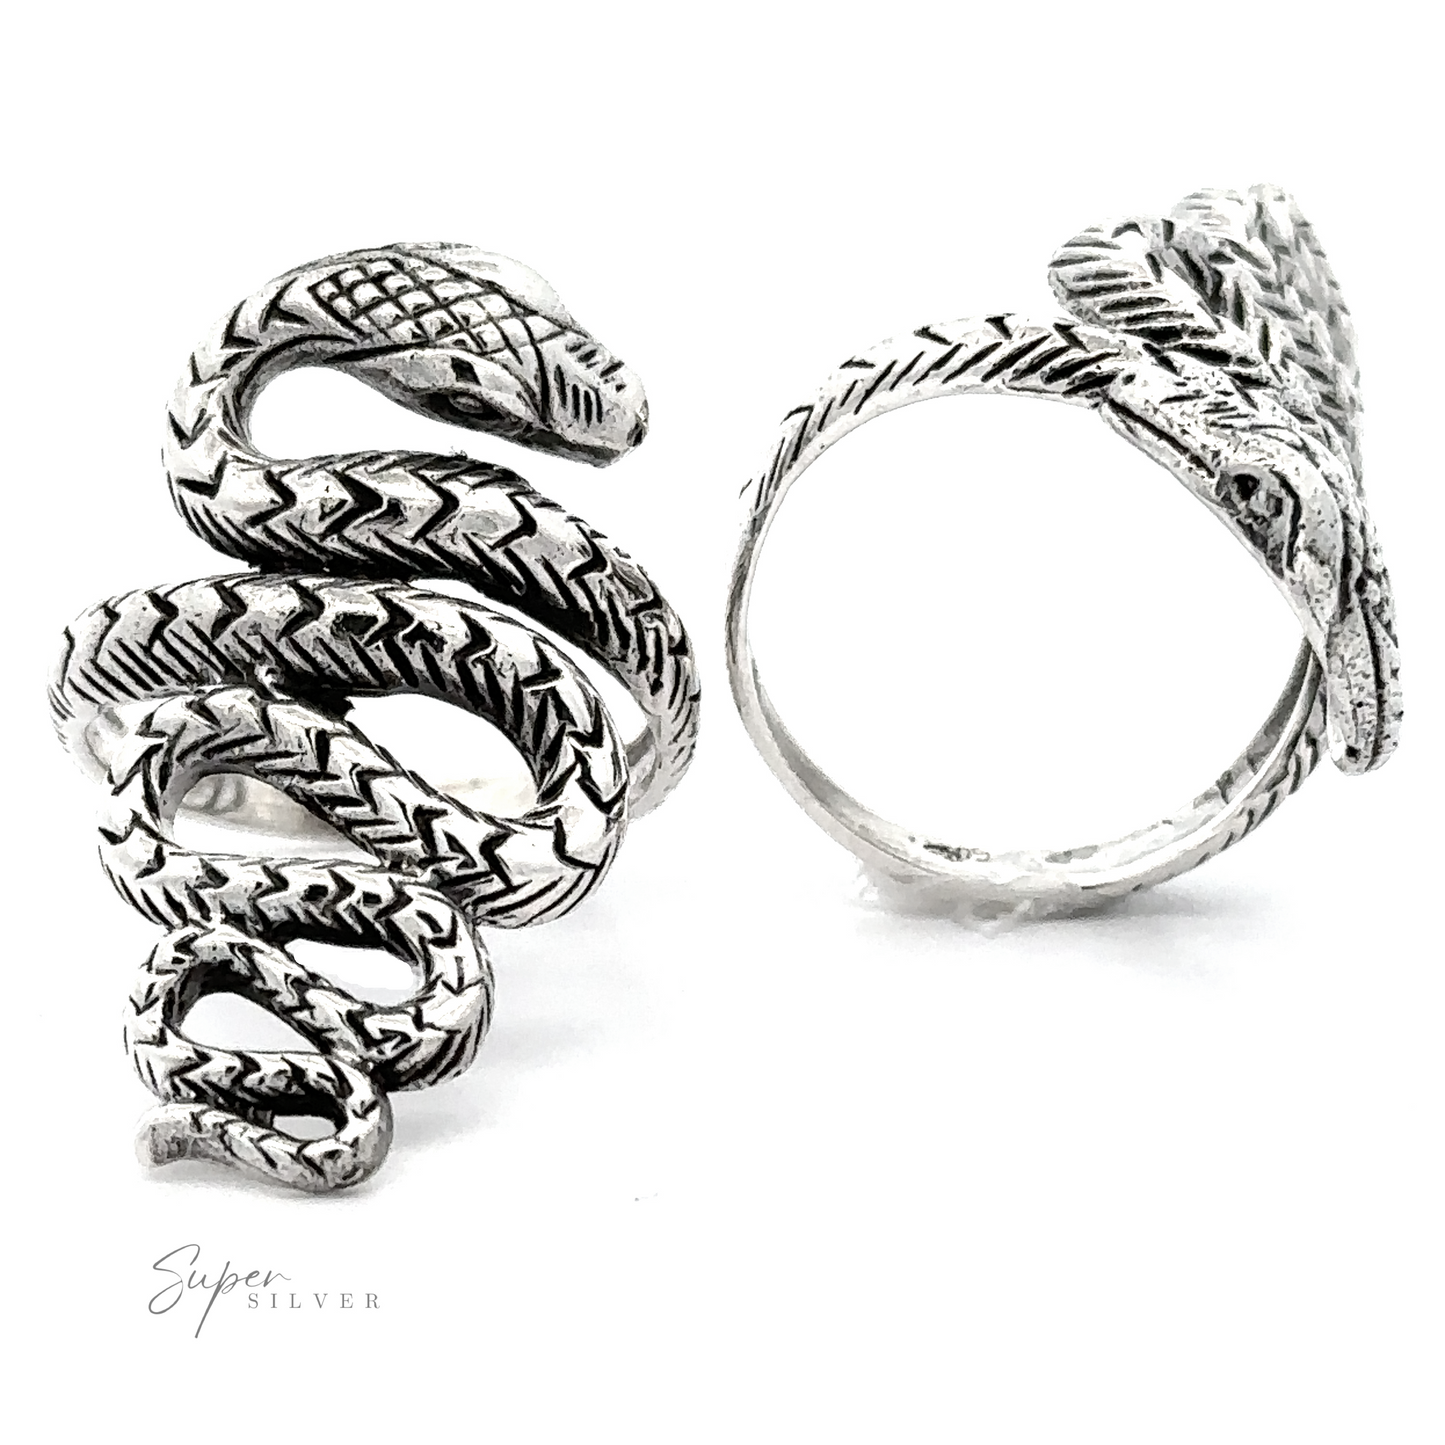 Three Slithering Snake Rings with intricate textures and patterns on a white background.